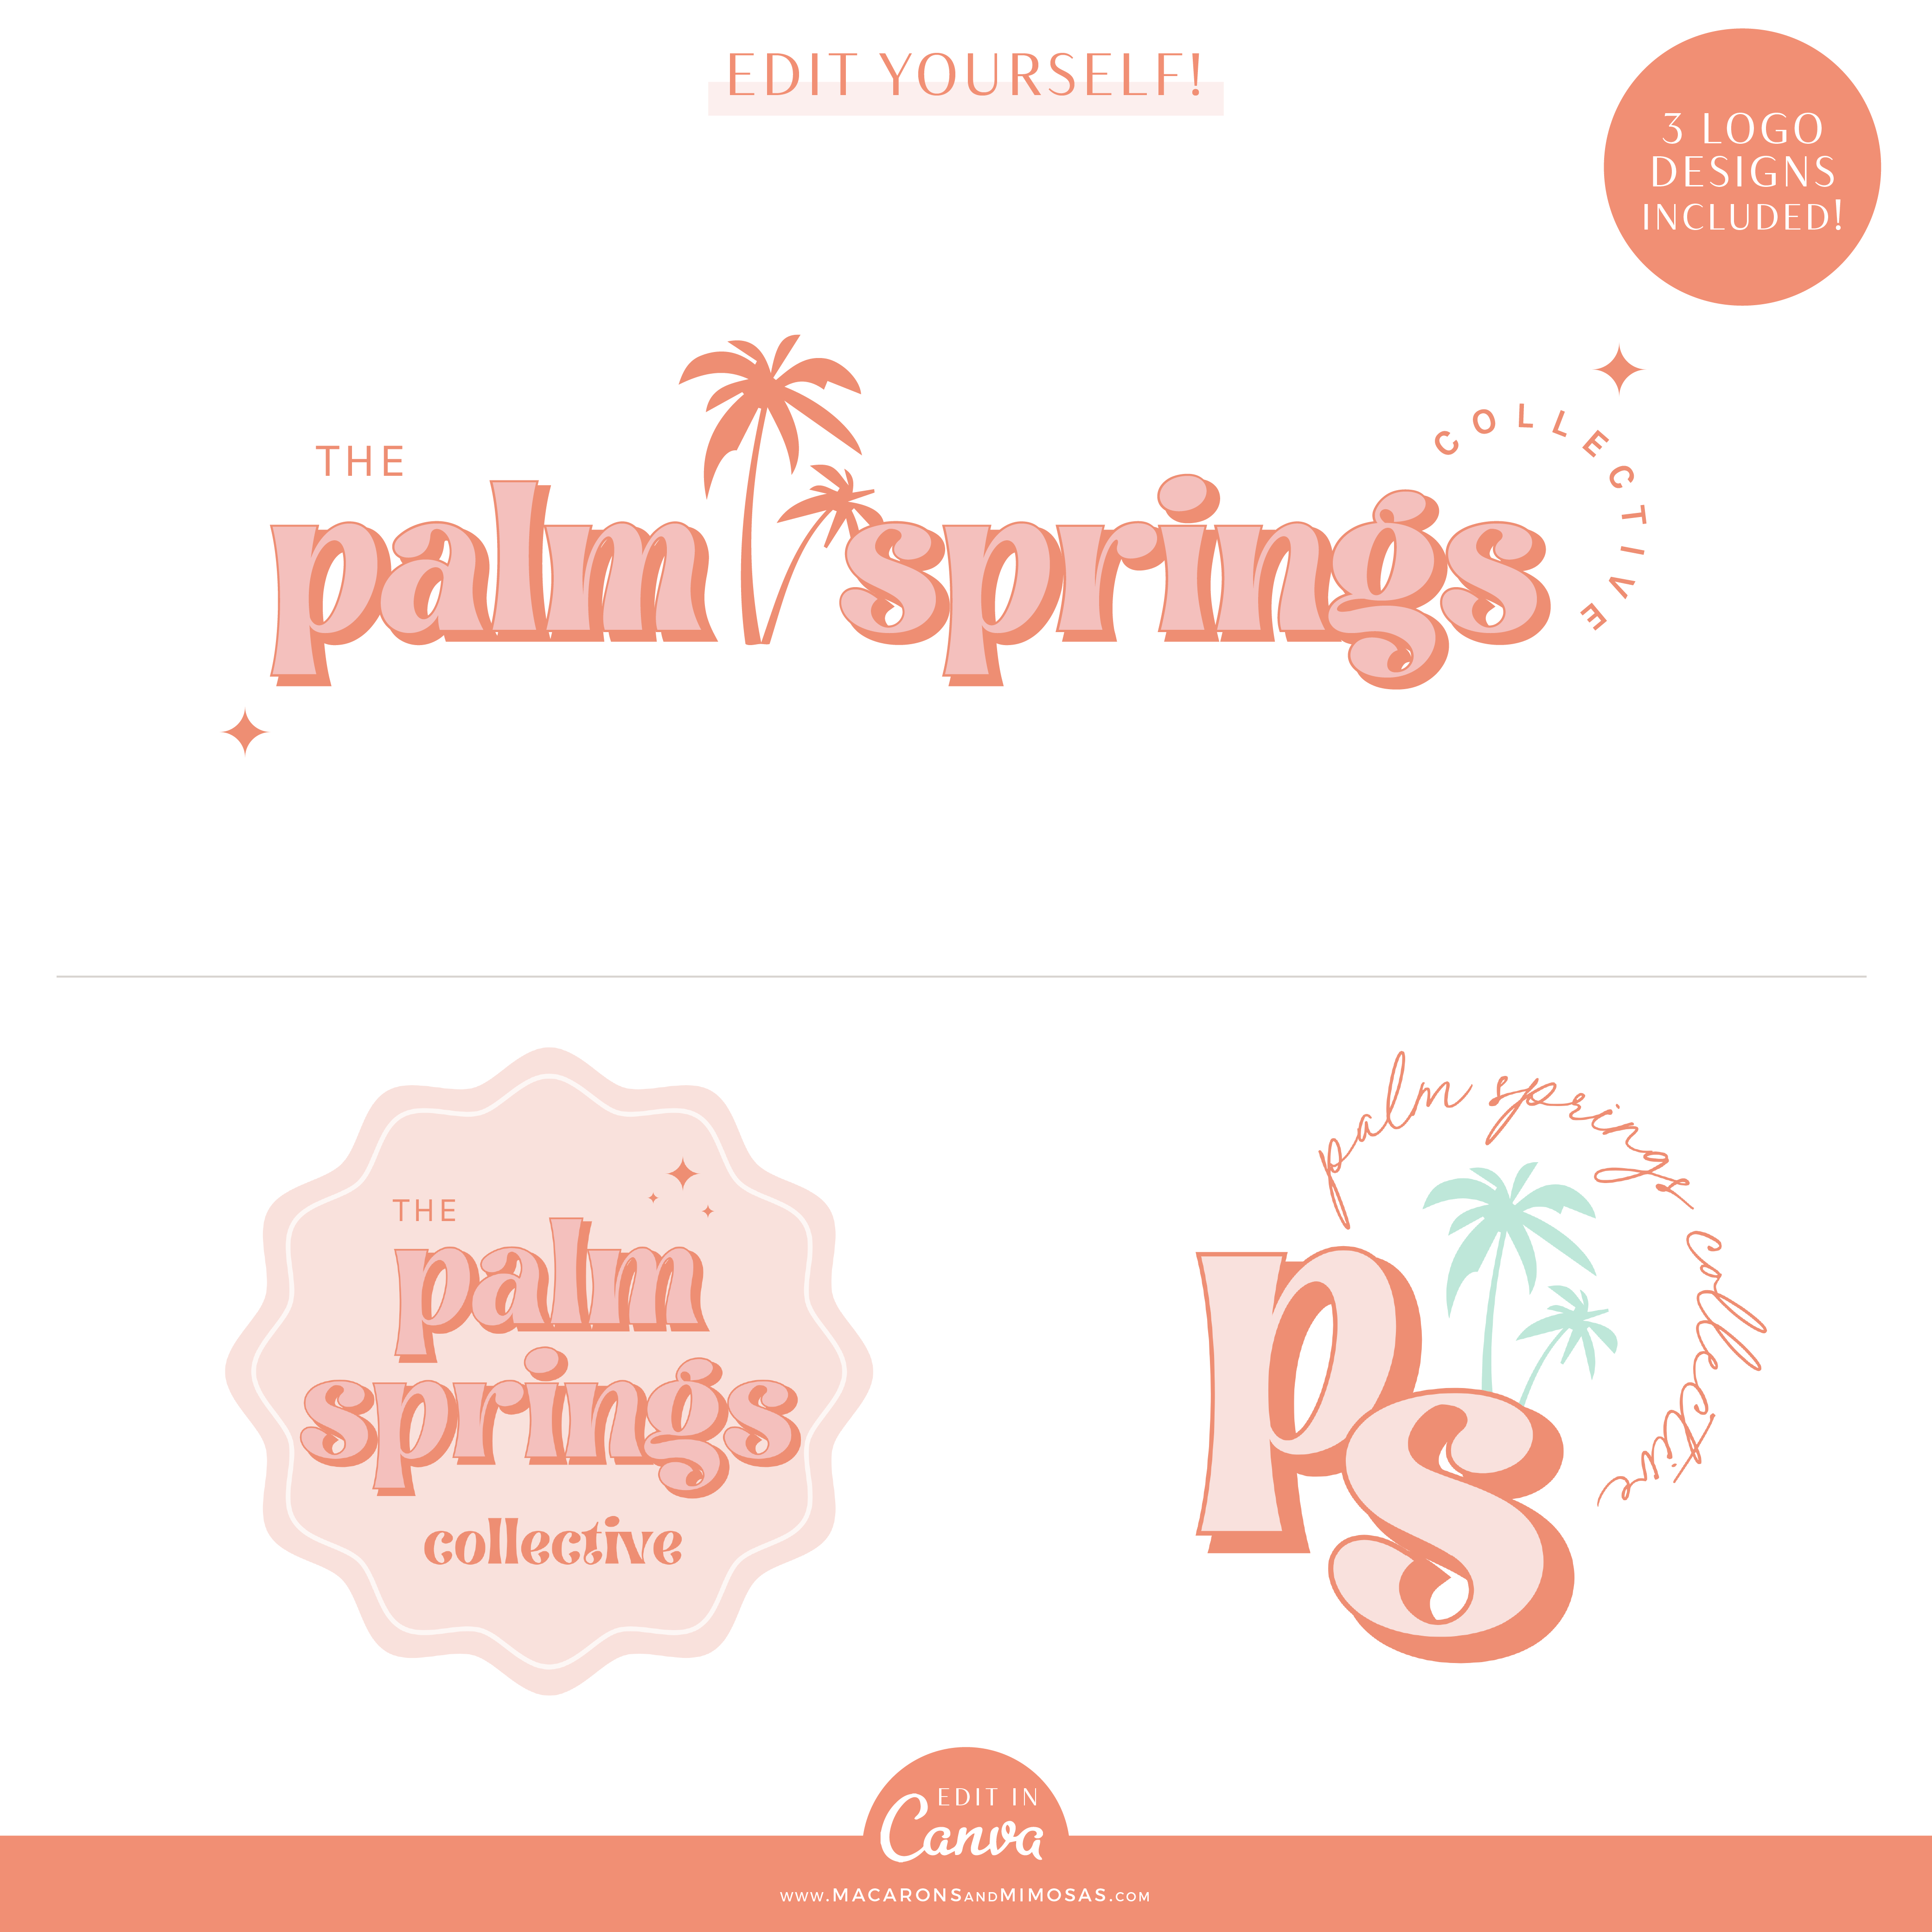 Palm Tree Canva Logo Template Kit in a Boho Aesthetic. Pink and Orange editable logo set and Free Brand Board for Canva DIY branding.